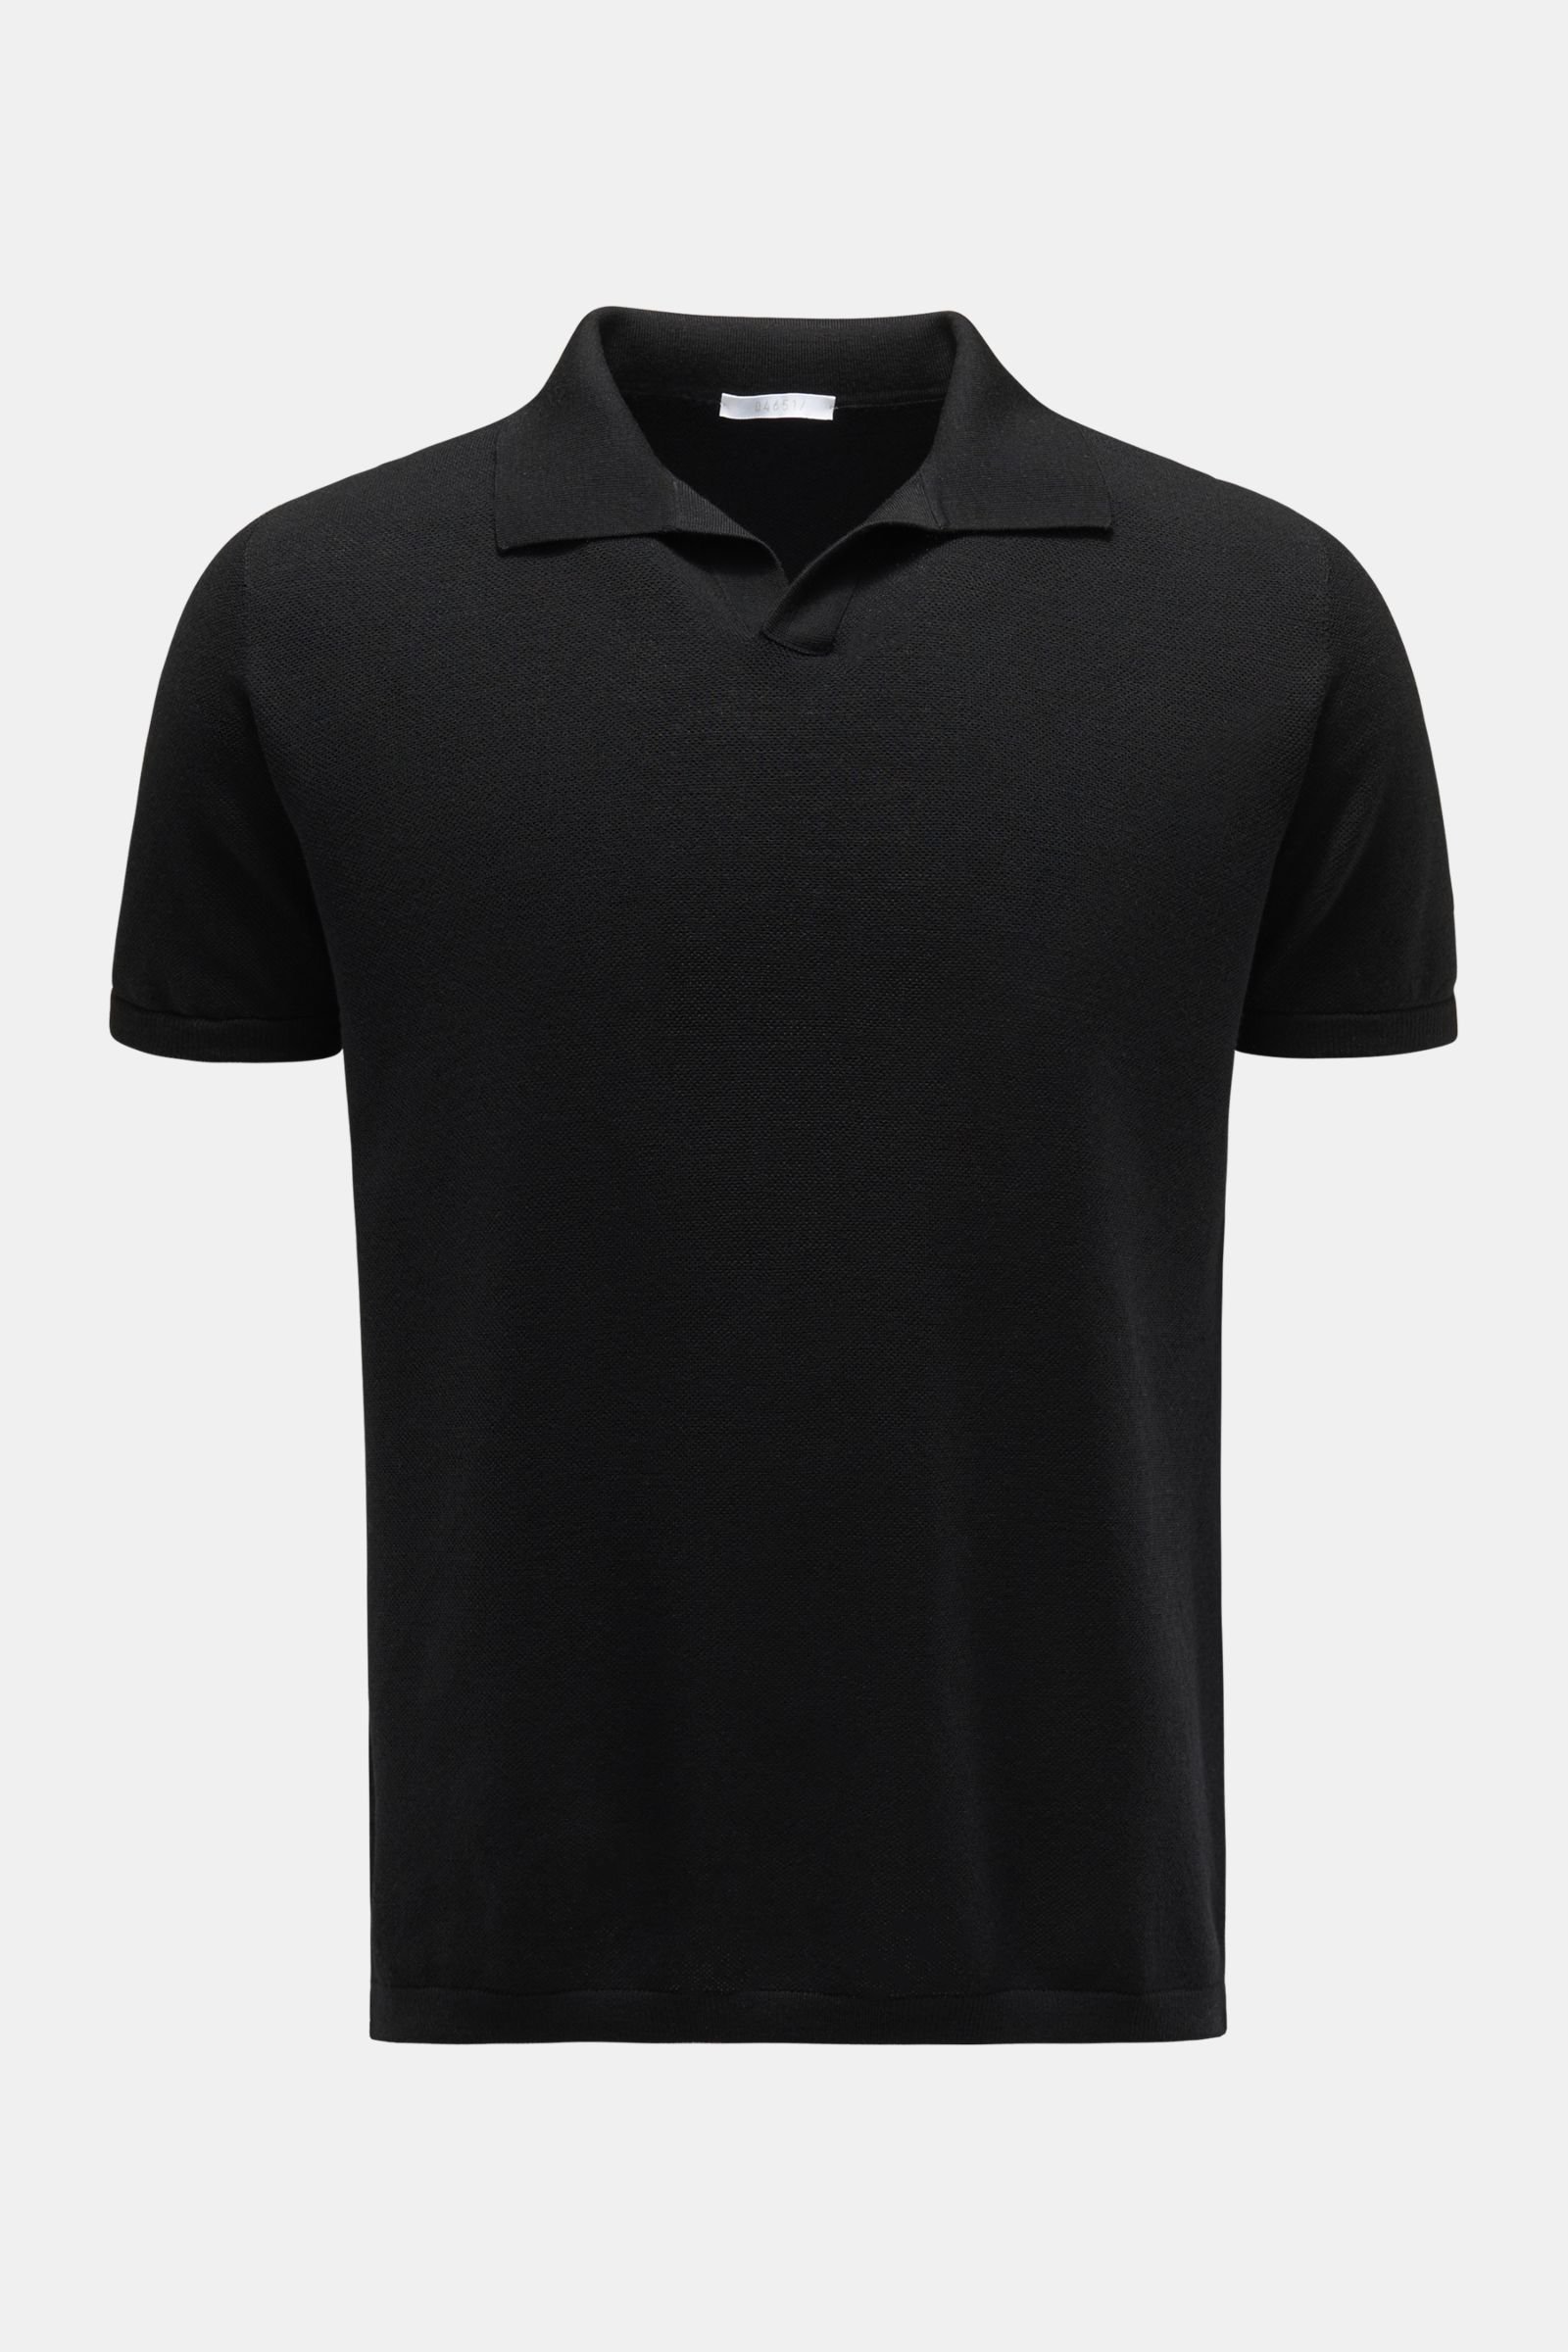 Short sleeve knit polo 'The Ultimate Polo' black